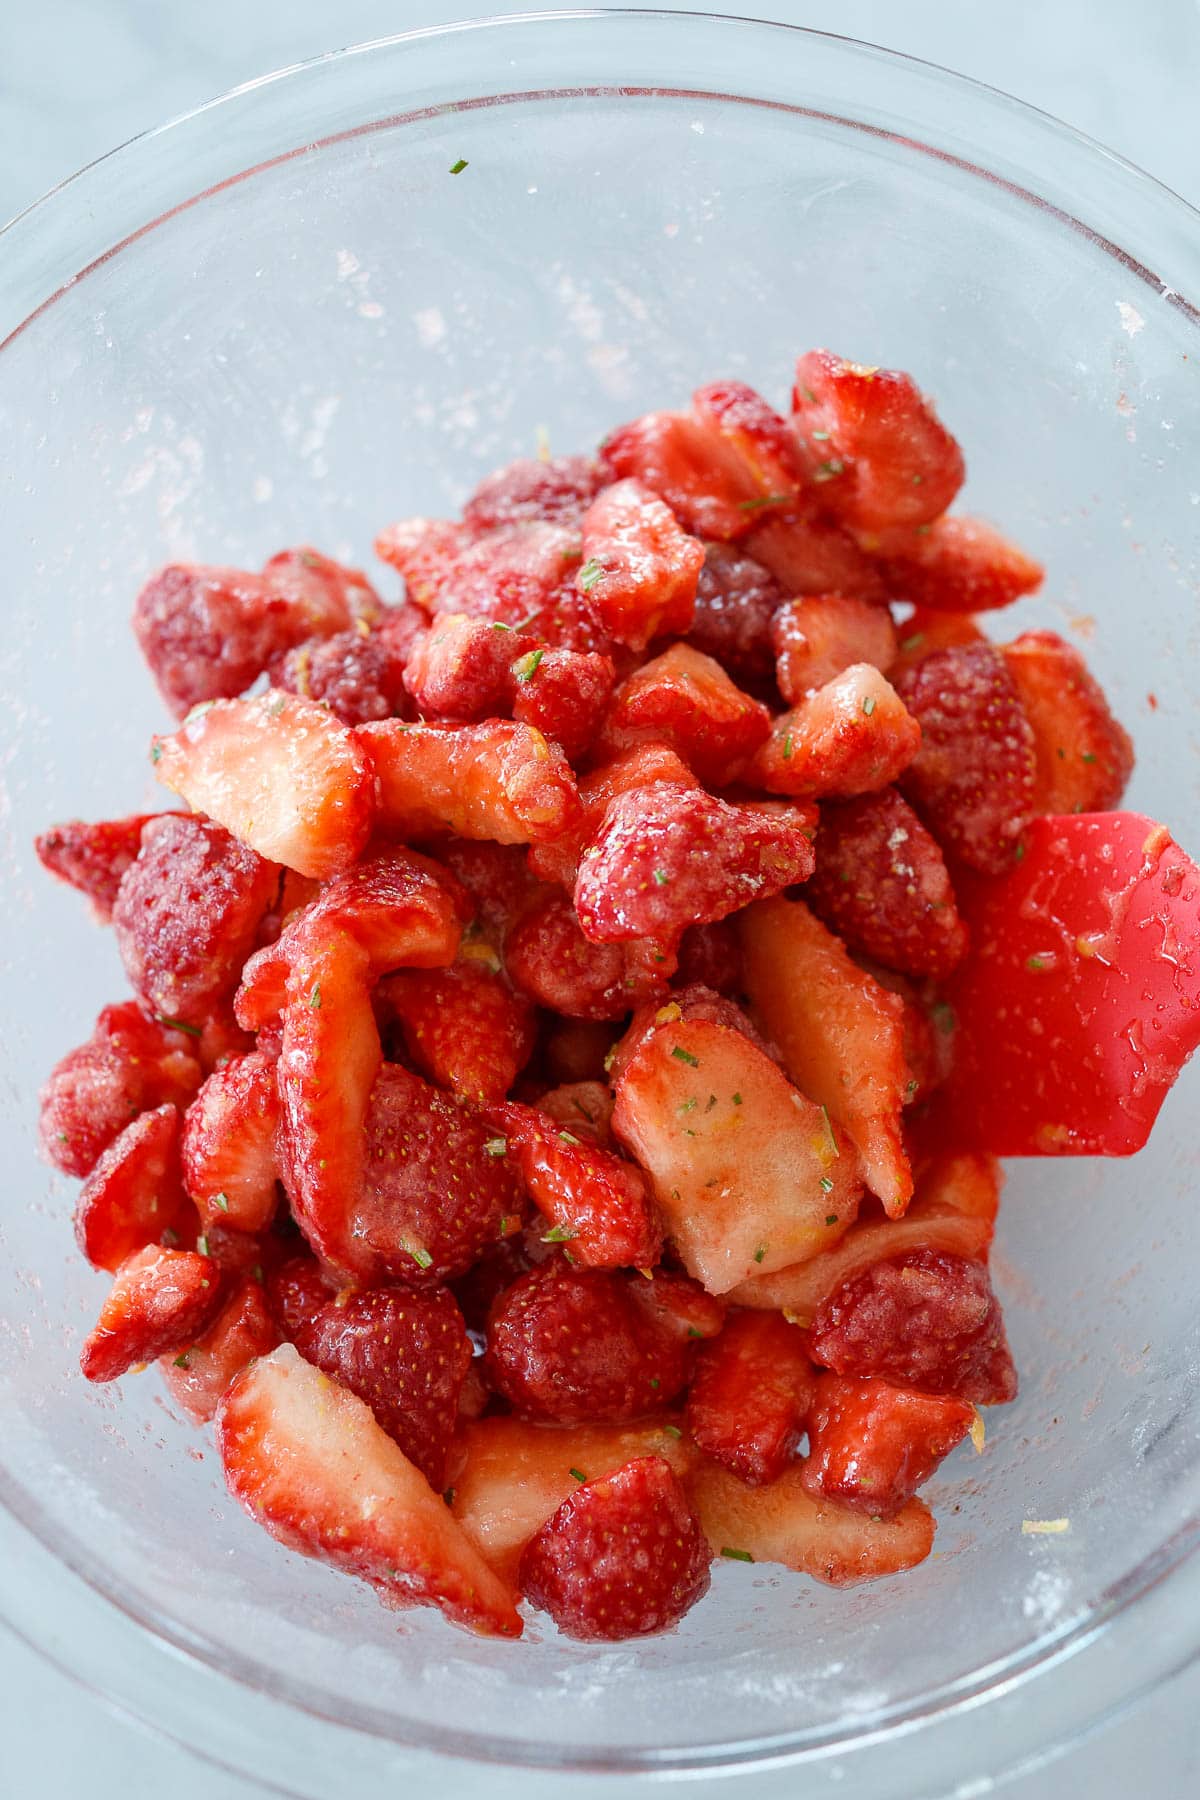 Strawberries in a bowl mixed with sugar.